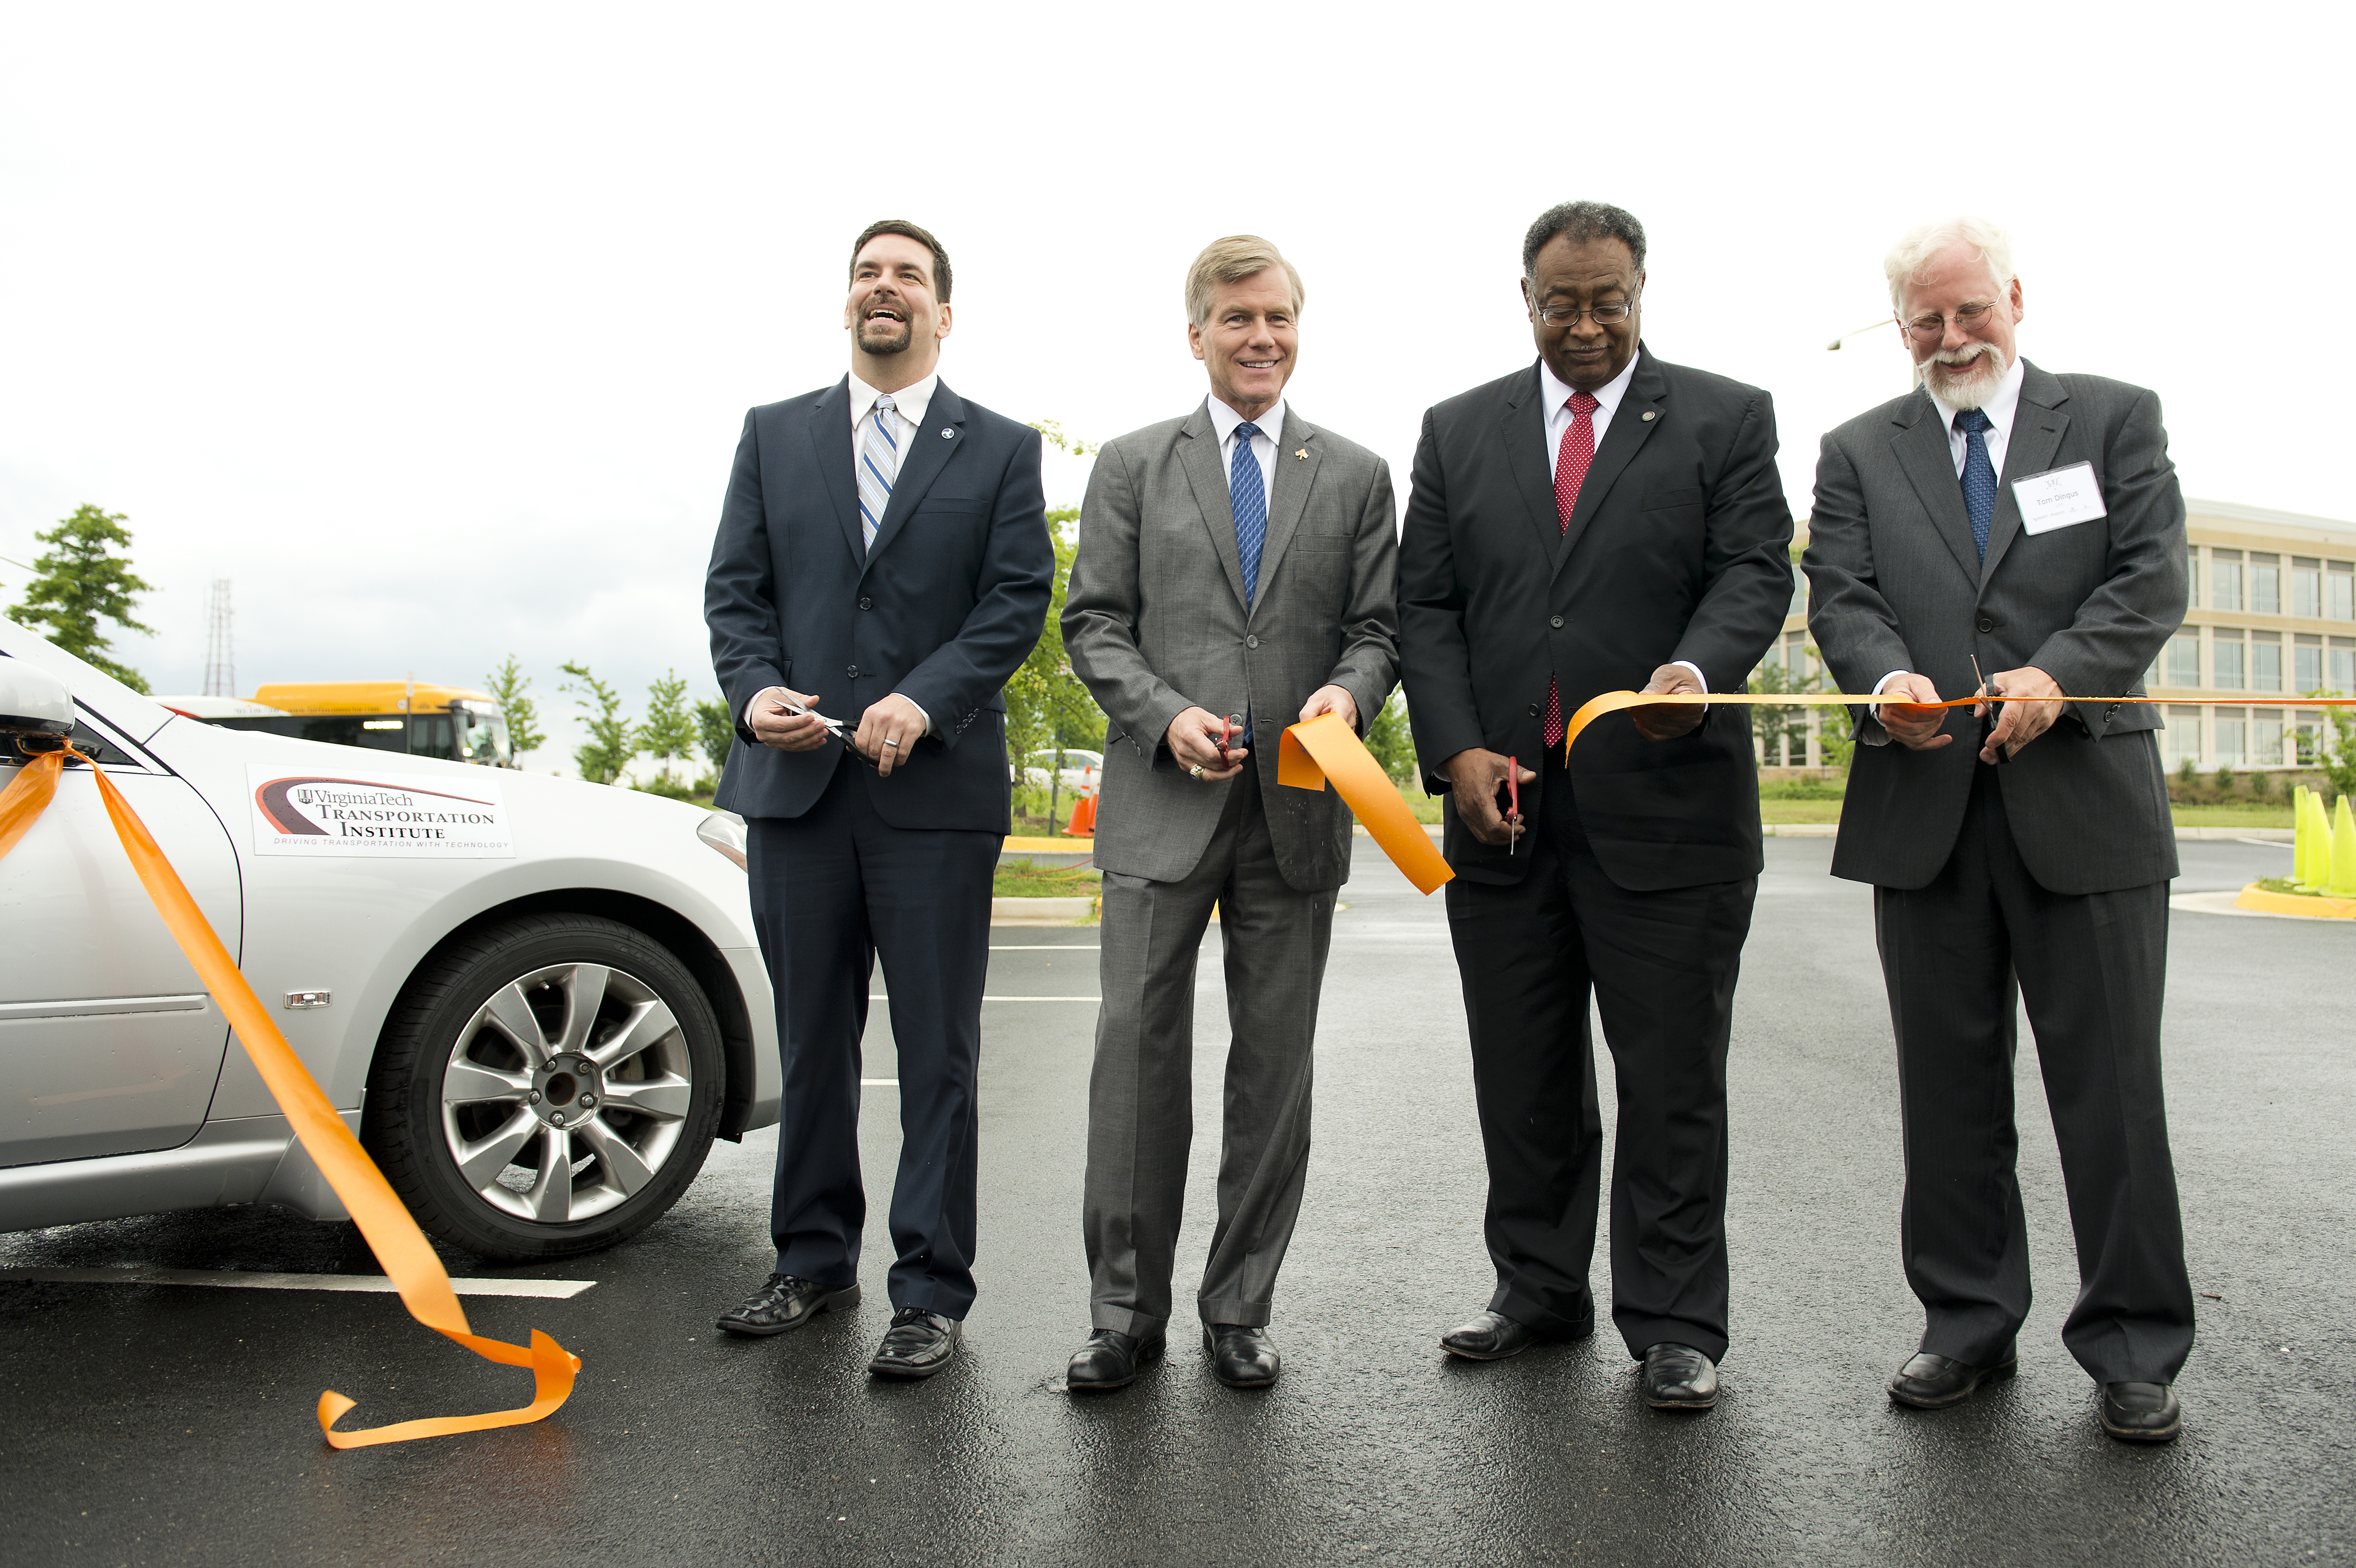 Officials cut the ribbon for a new Interstate 66 research effort